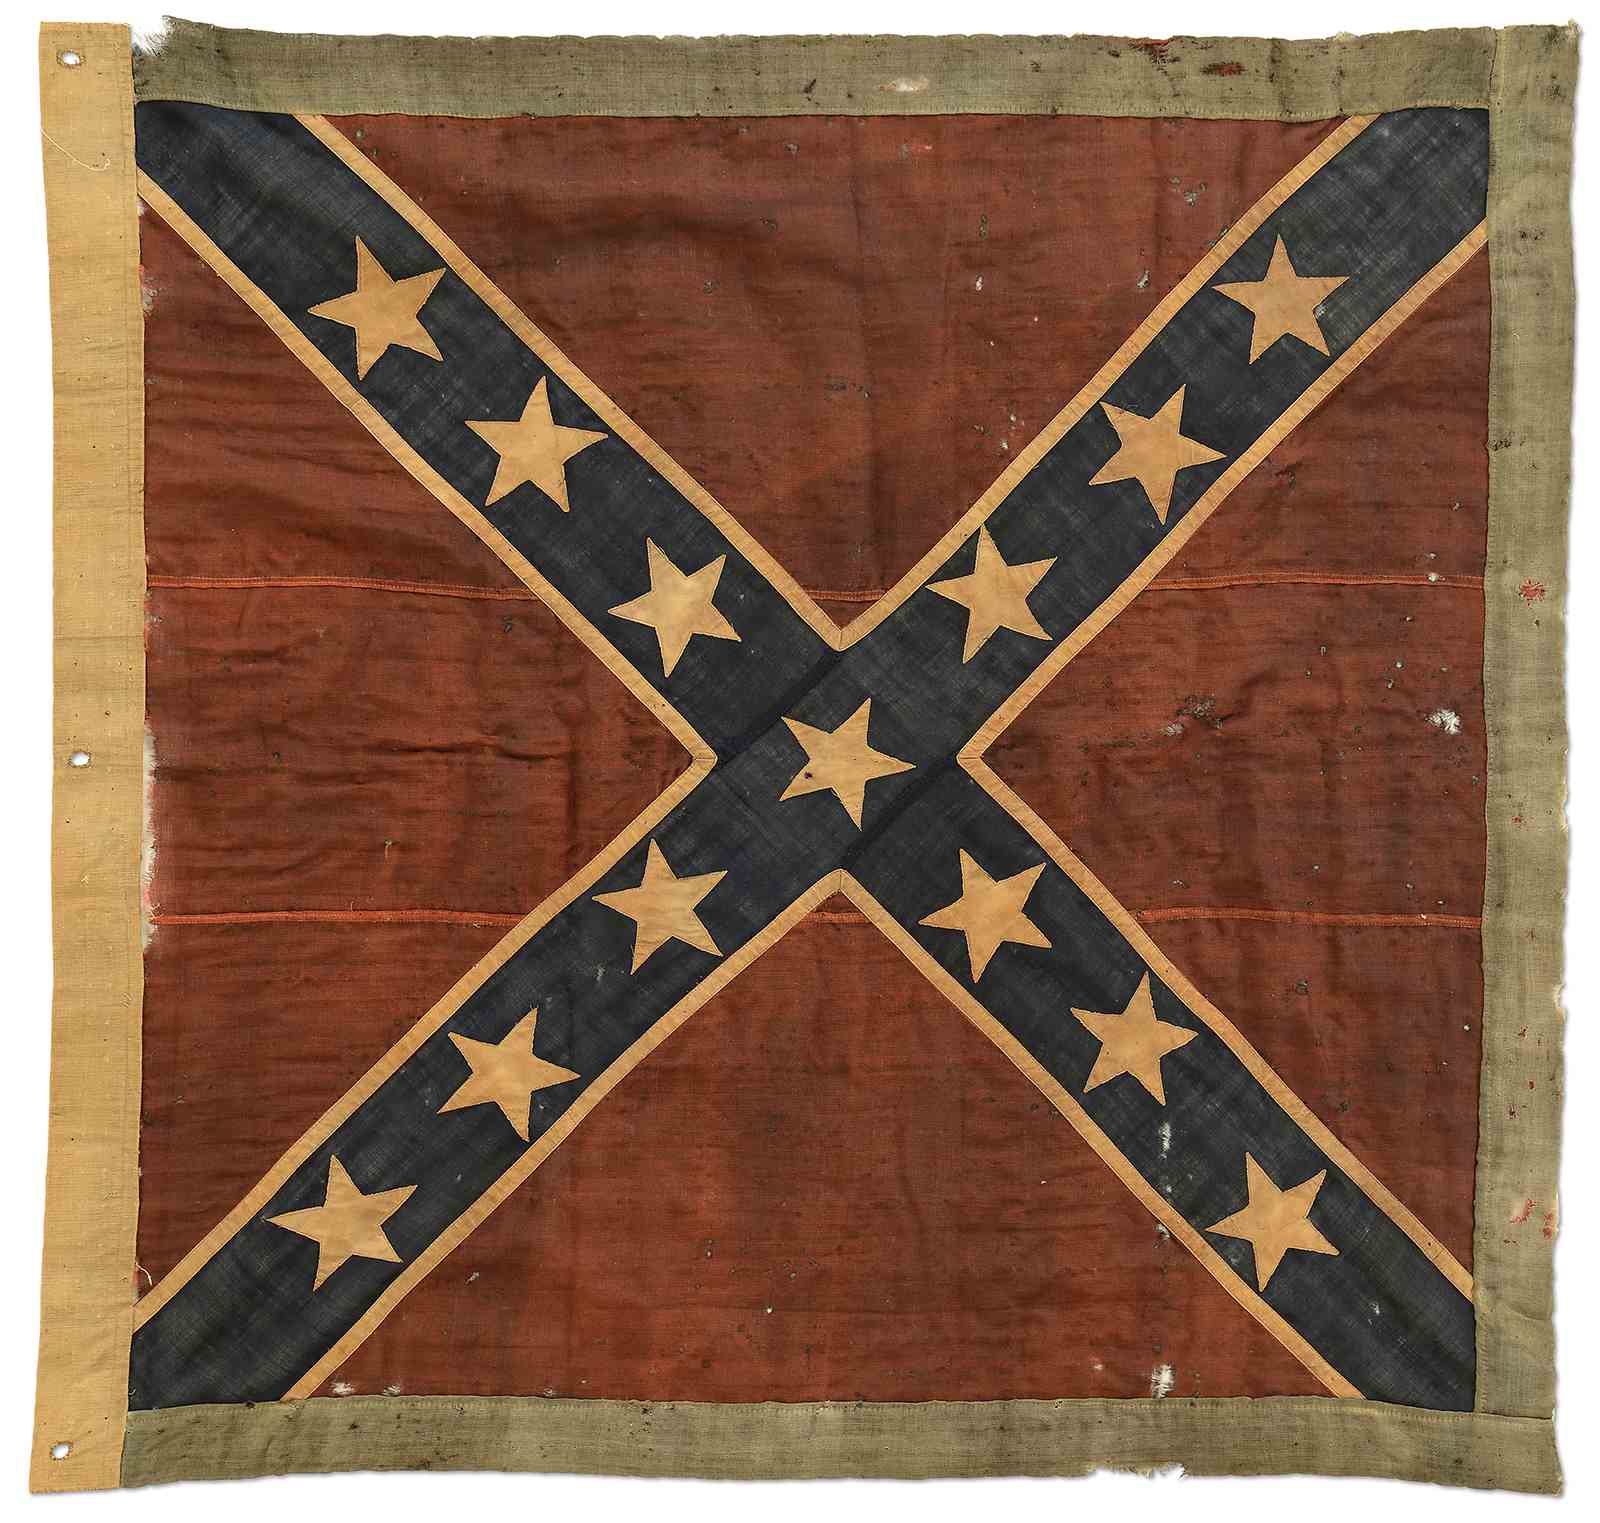 The unique Army of Northern Virginia Battle Flag of Confederate Marines under Robert E. Lee. It was captured at the Battle of Sailor’s Creek.